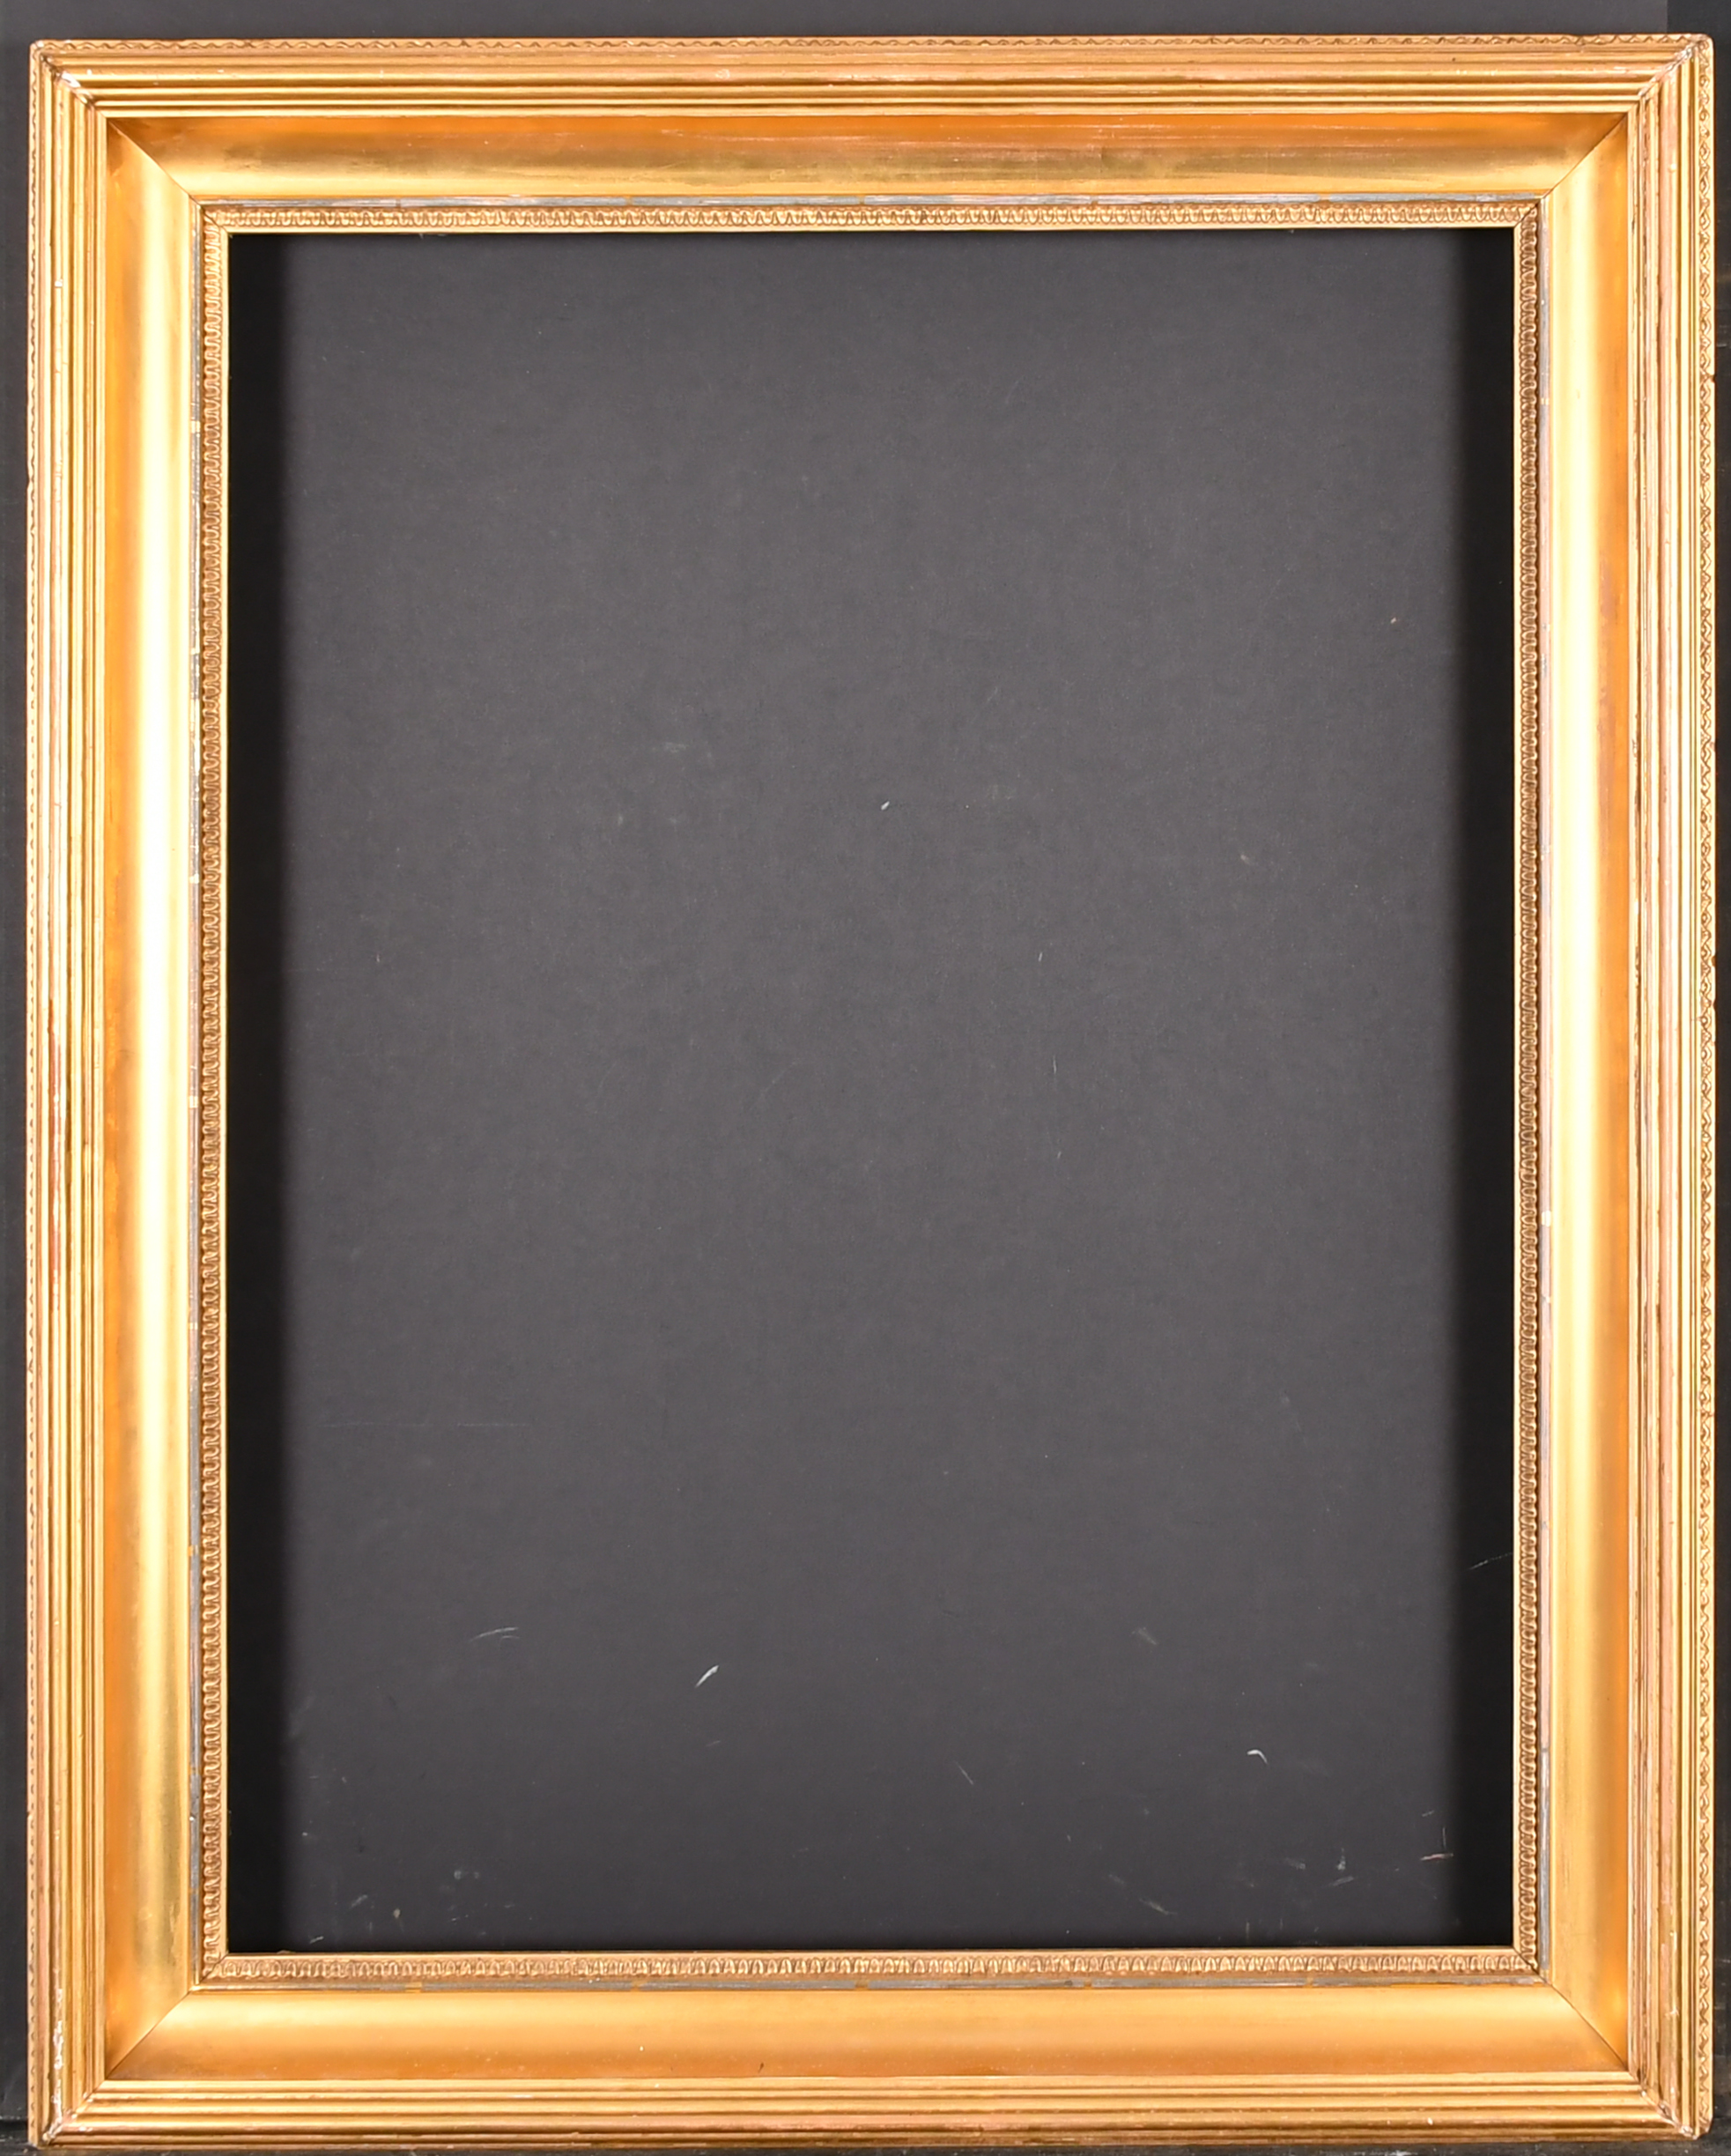 19th Century English School. A Hollow Gilt Composition Frame, rebate 24.5" x 18" (62.2 x 45.7cm) - Image 2 of 3